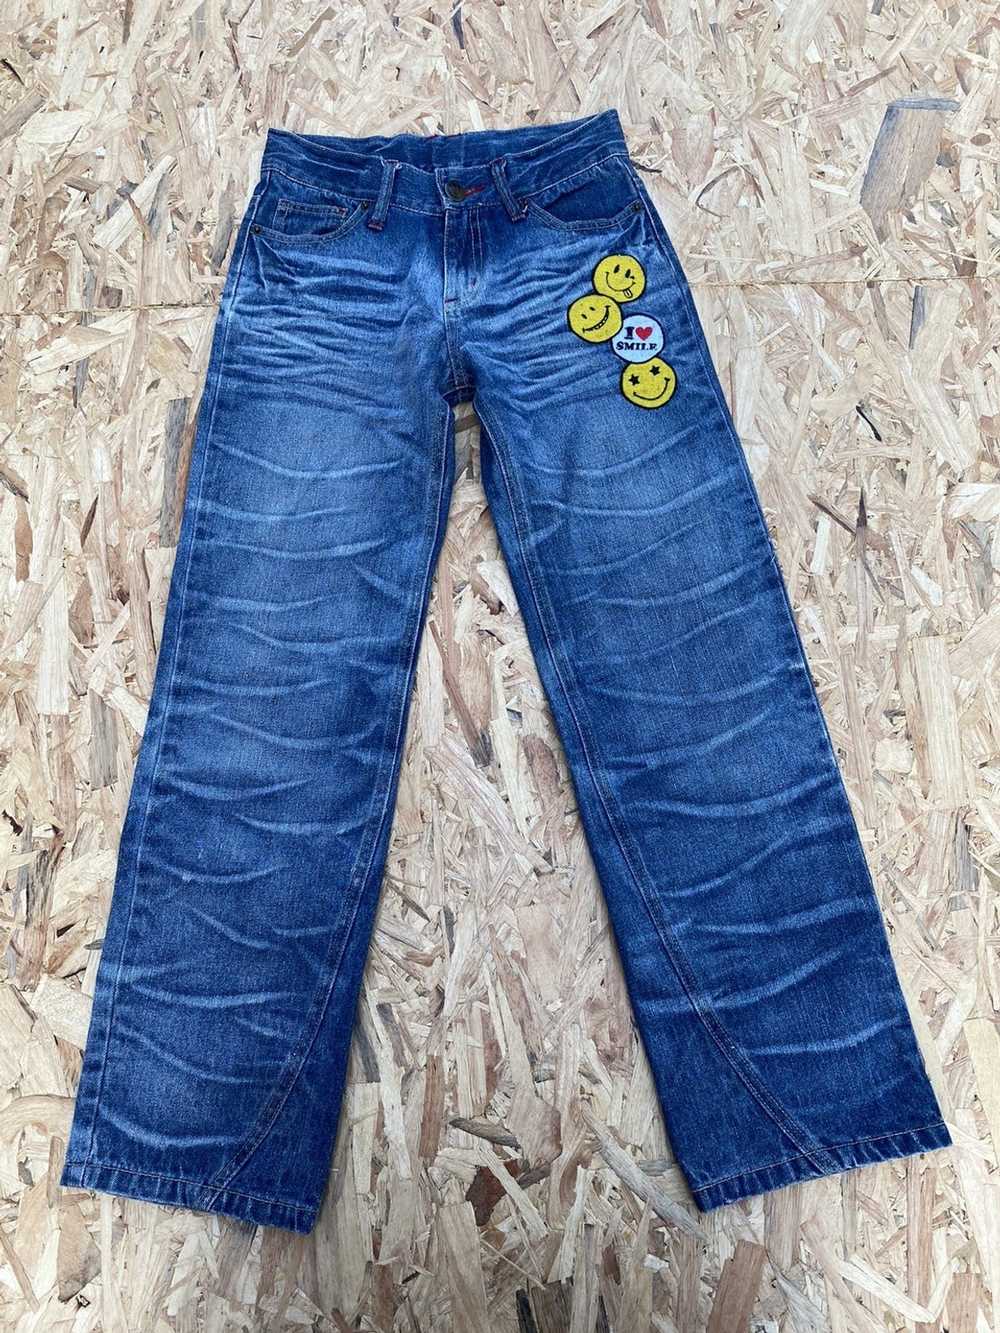 Japanese Brand Smiley Face Jeans - image 6